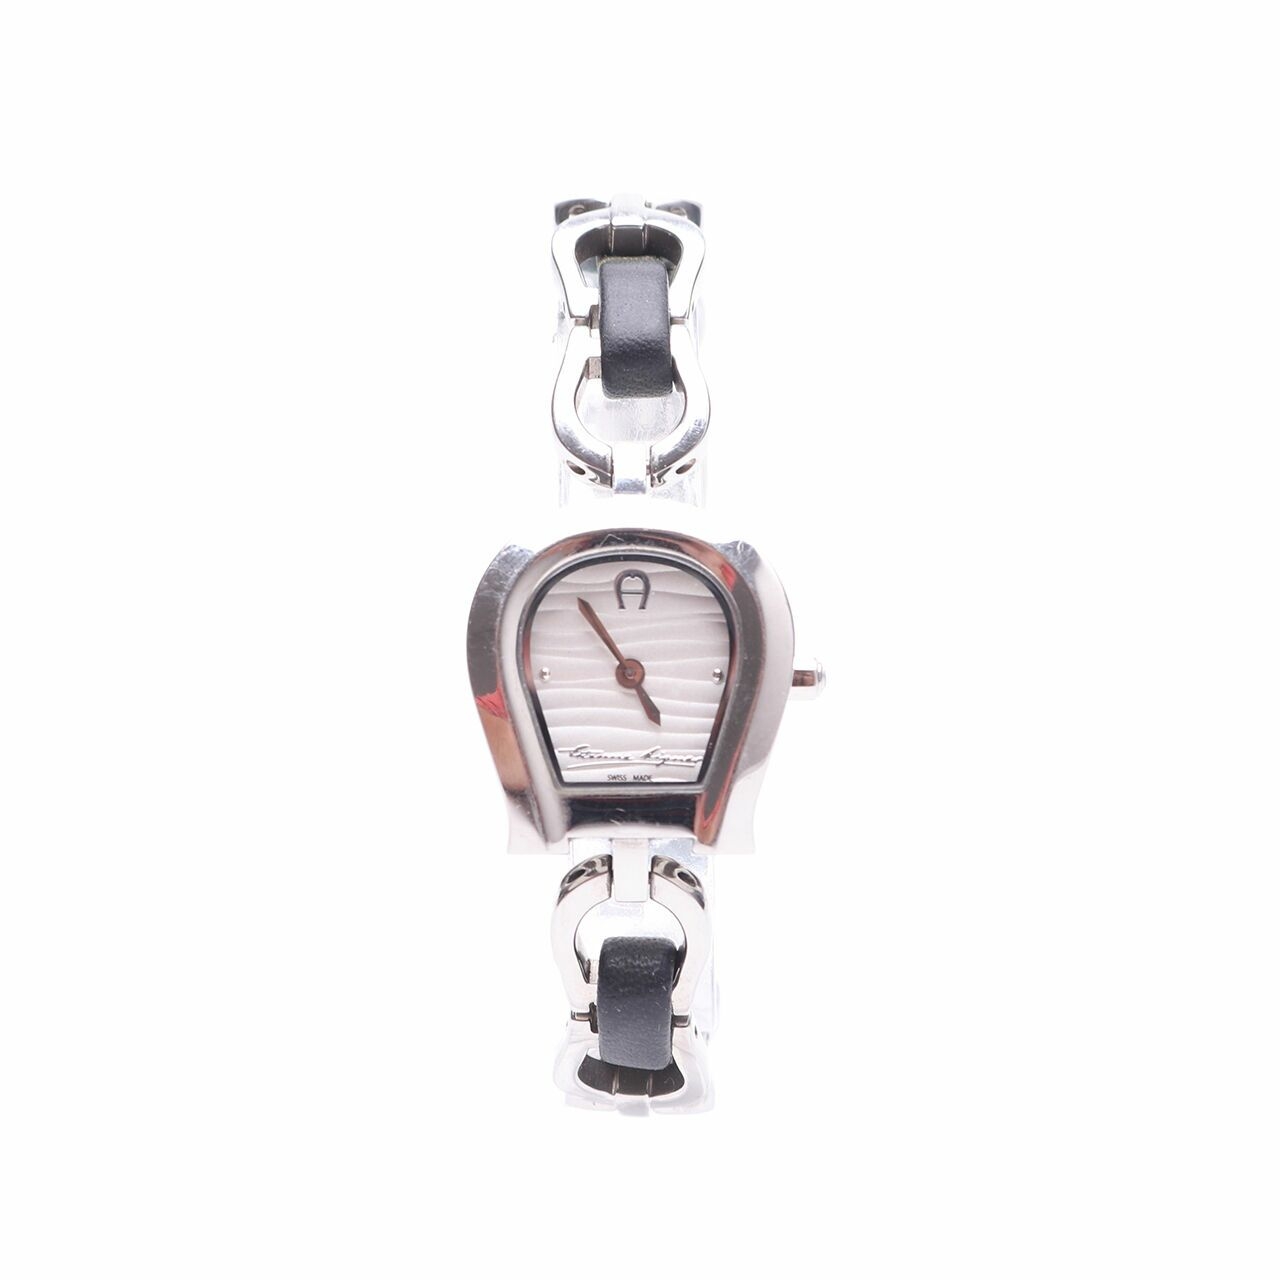 Aigner Perugia Black Stainless Steel Leather Wristwatch